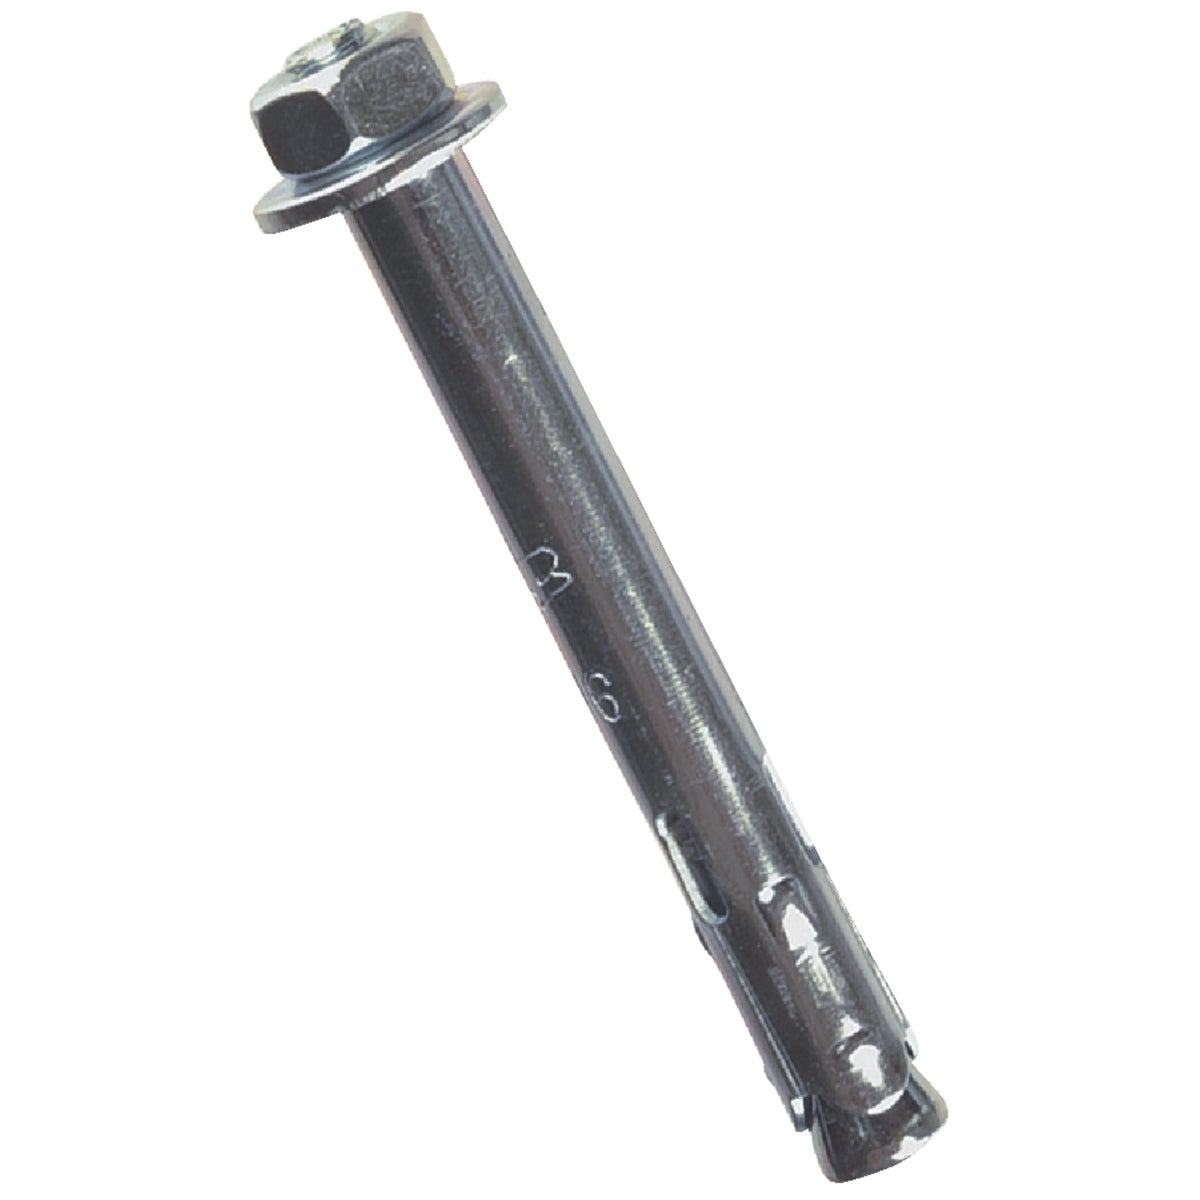 Red Head 5/16 In. x 2-1/2 In. Sleeve Stud Bolt Anchor